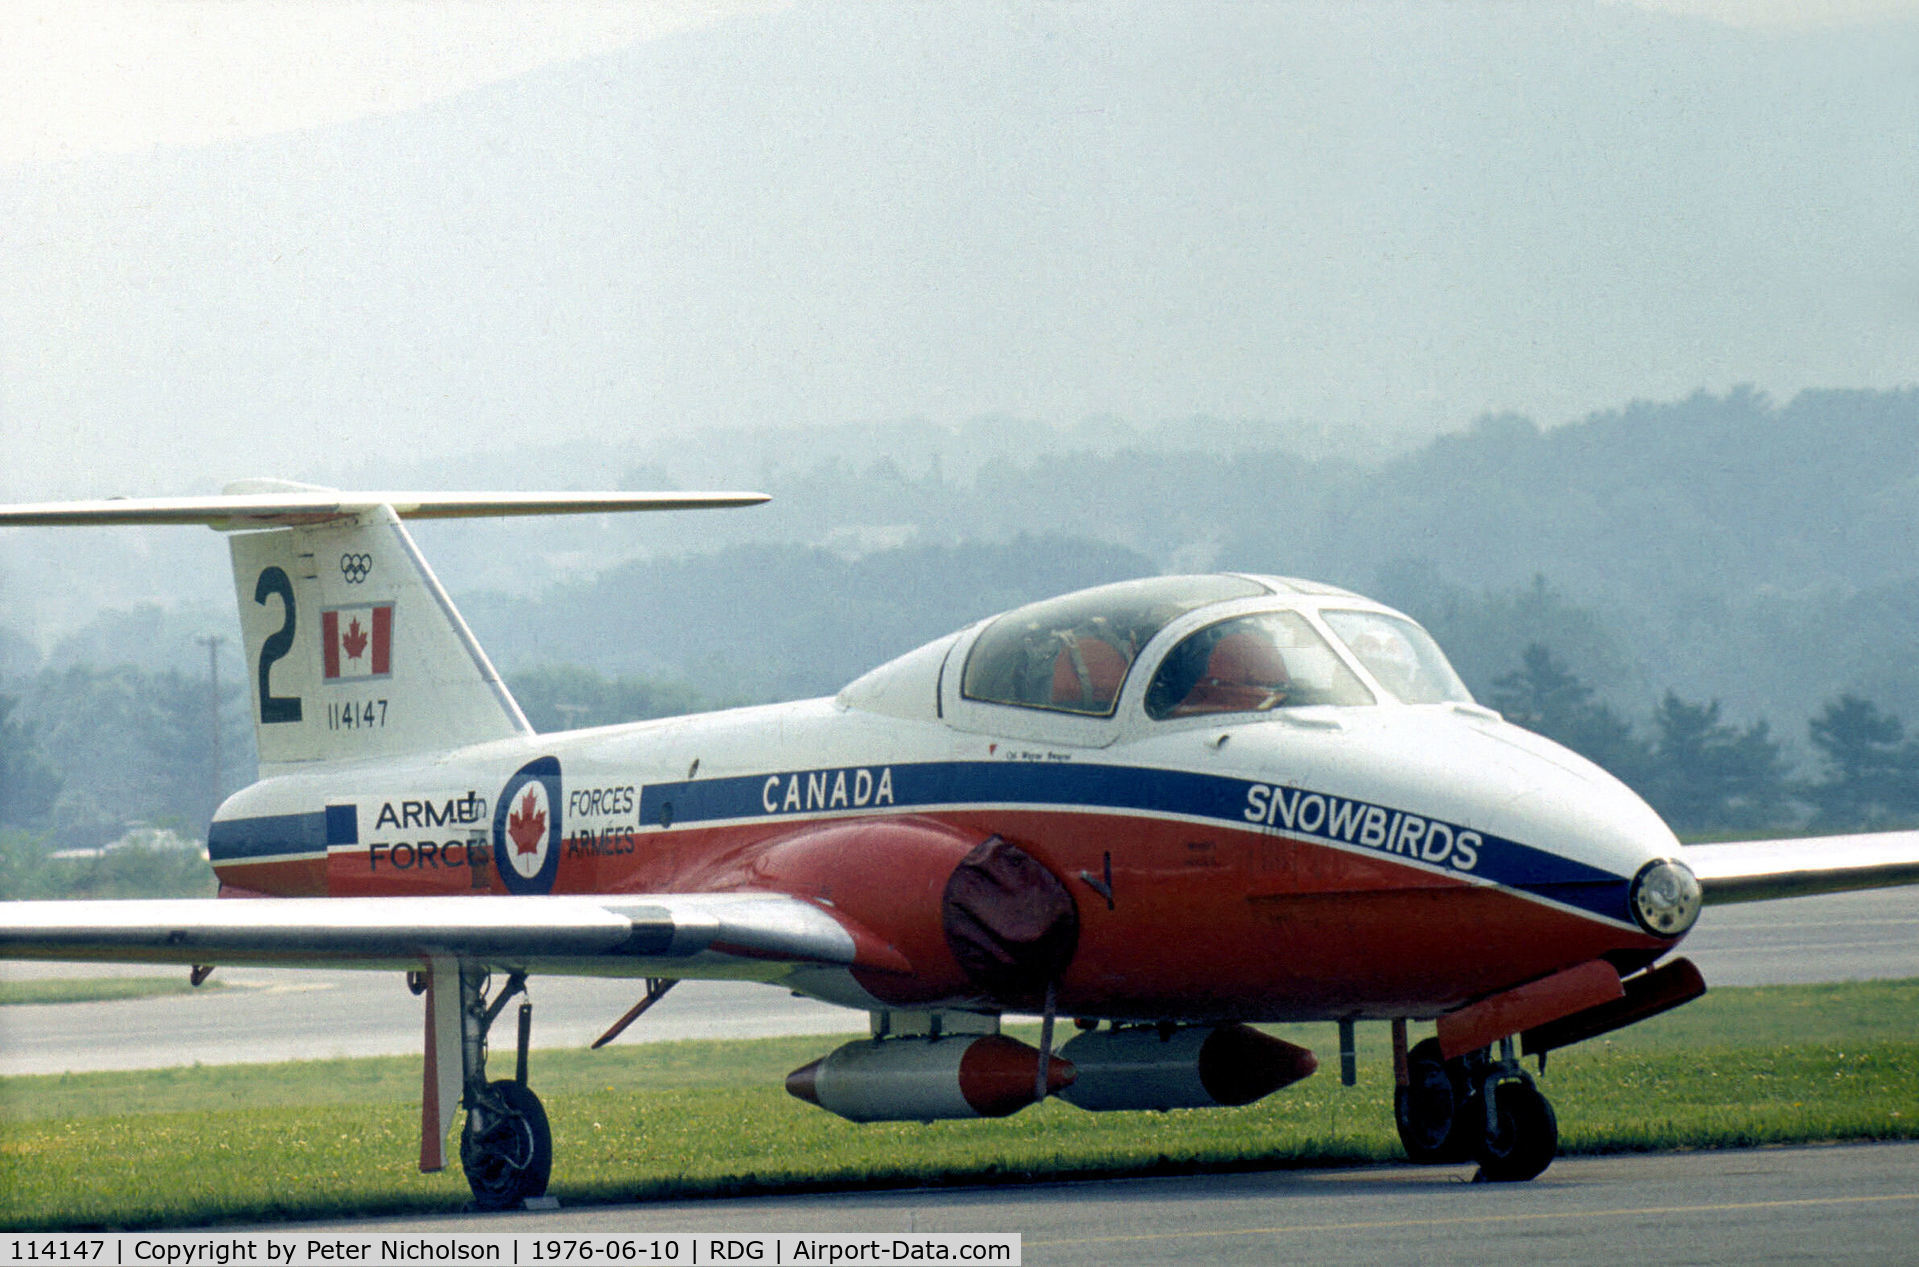 114147, 1971 Canadair CT-114 Tutor C/N 1147, CT-114 of the Canadian Armed Forces Snowbirds aerobatic team on the flightline at the 1976 Reading Airshow.